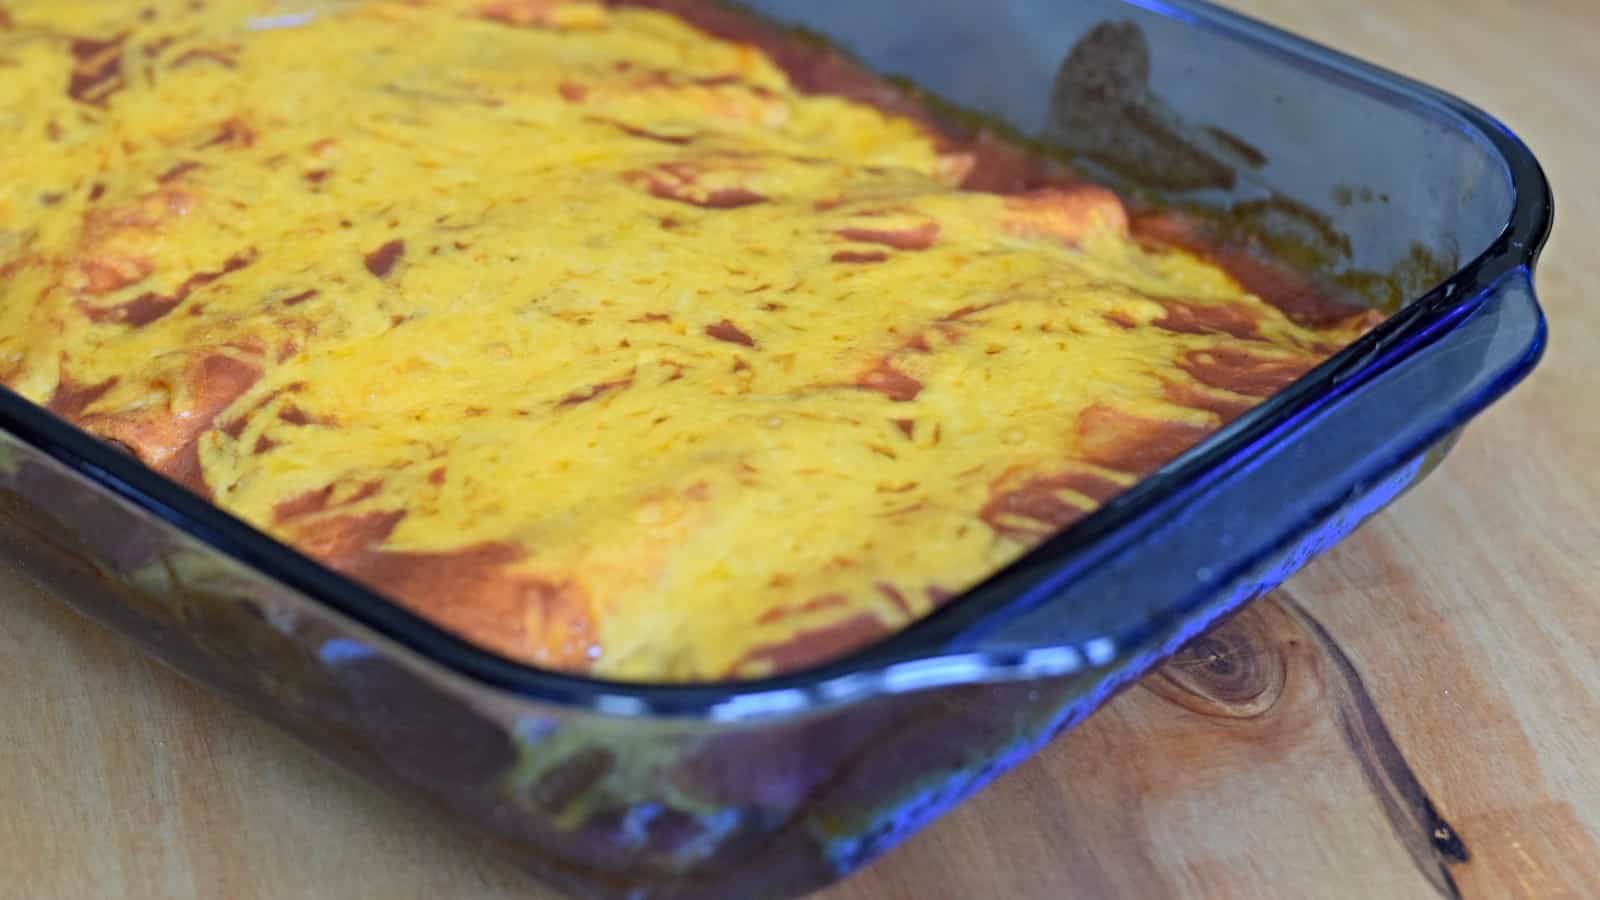 Image shows baked cheesy chicken enchiladas in a blue Pyrex casserole.